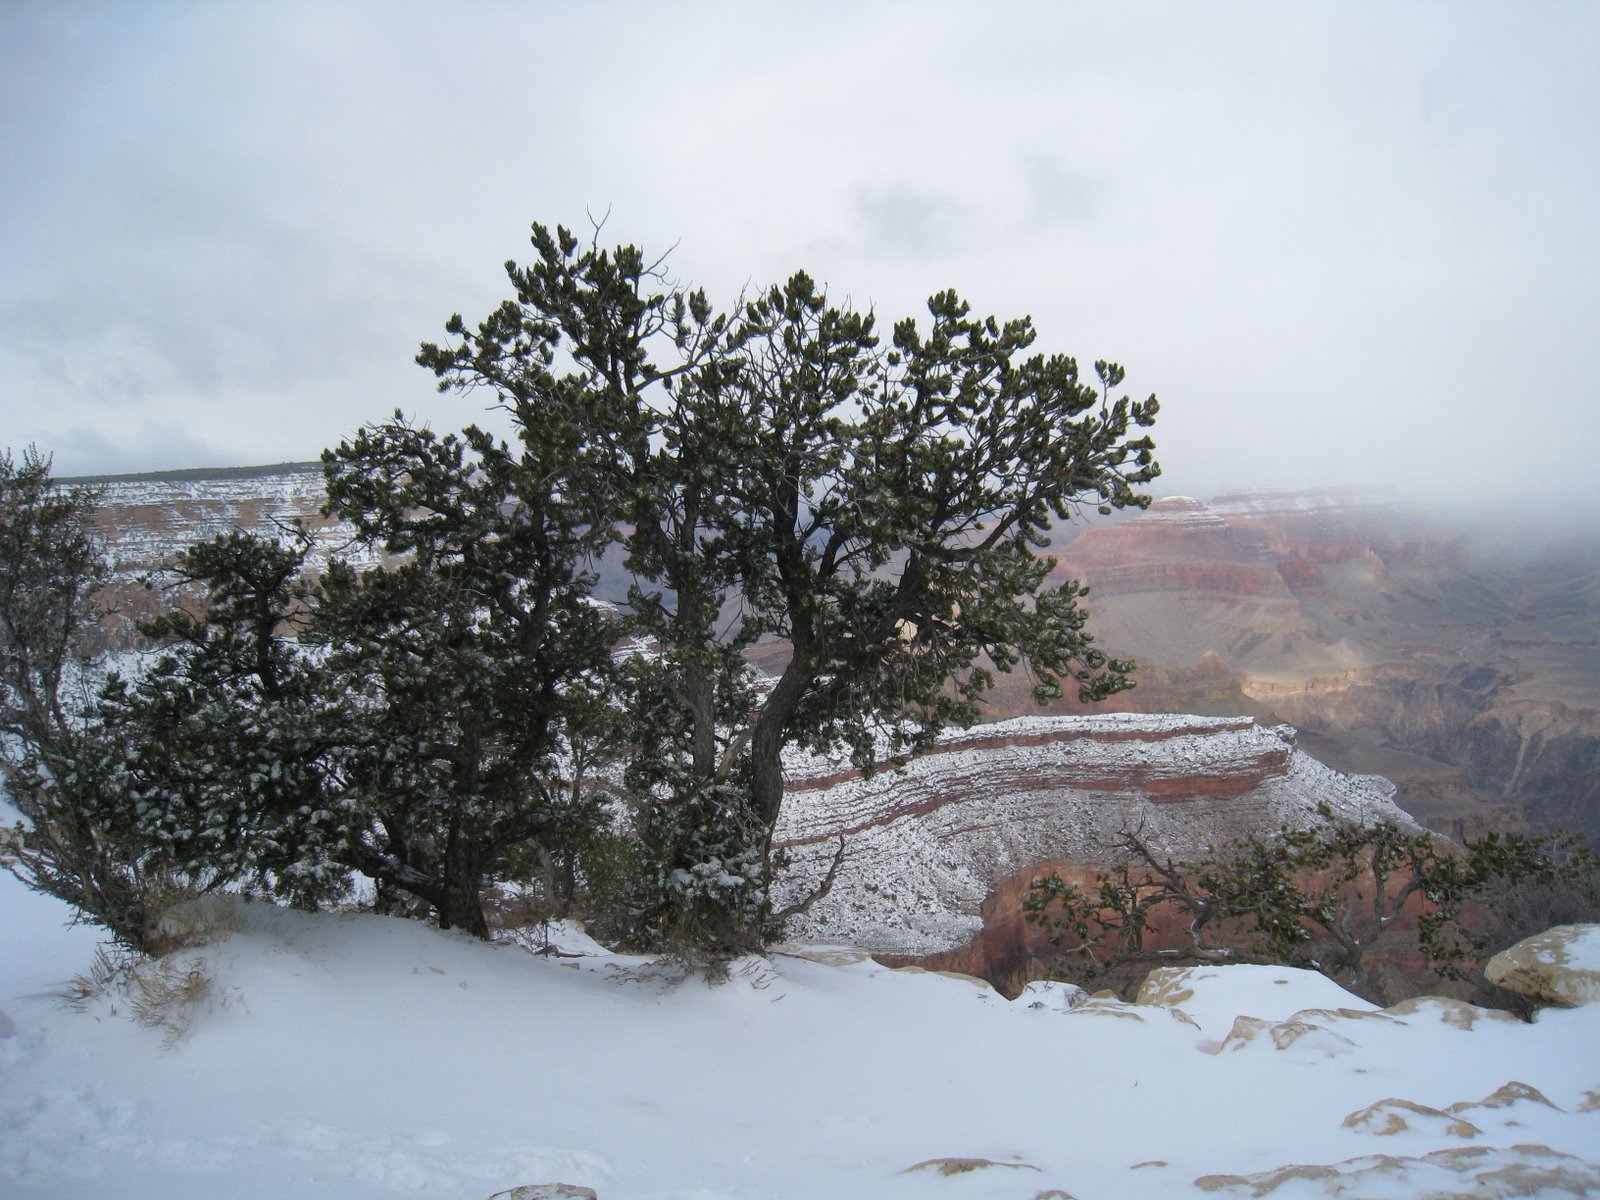 View from the Yavapai Point